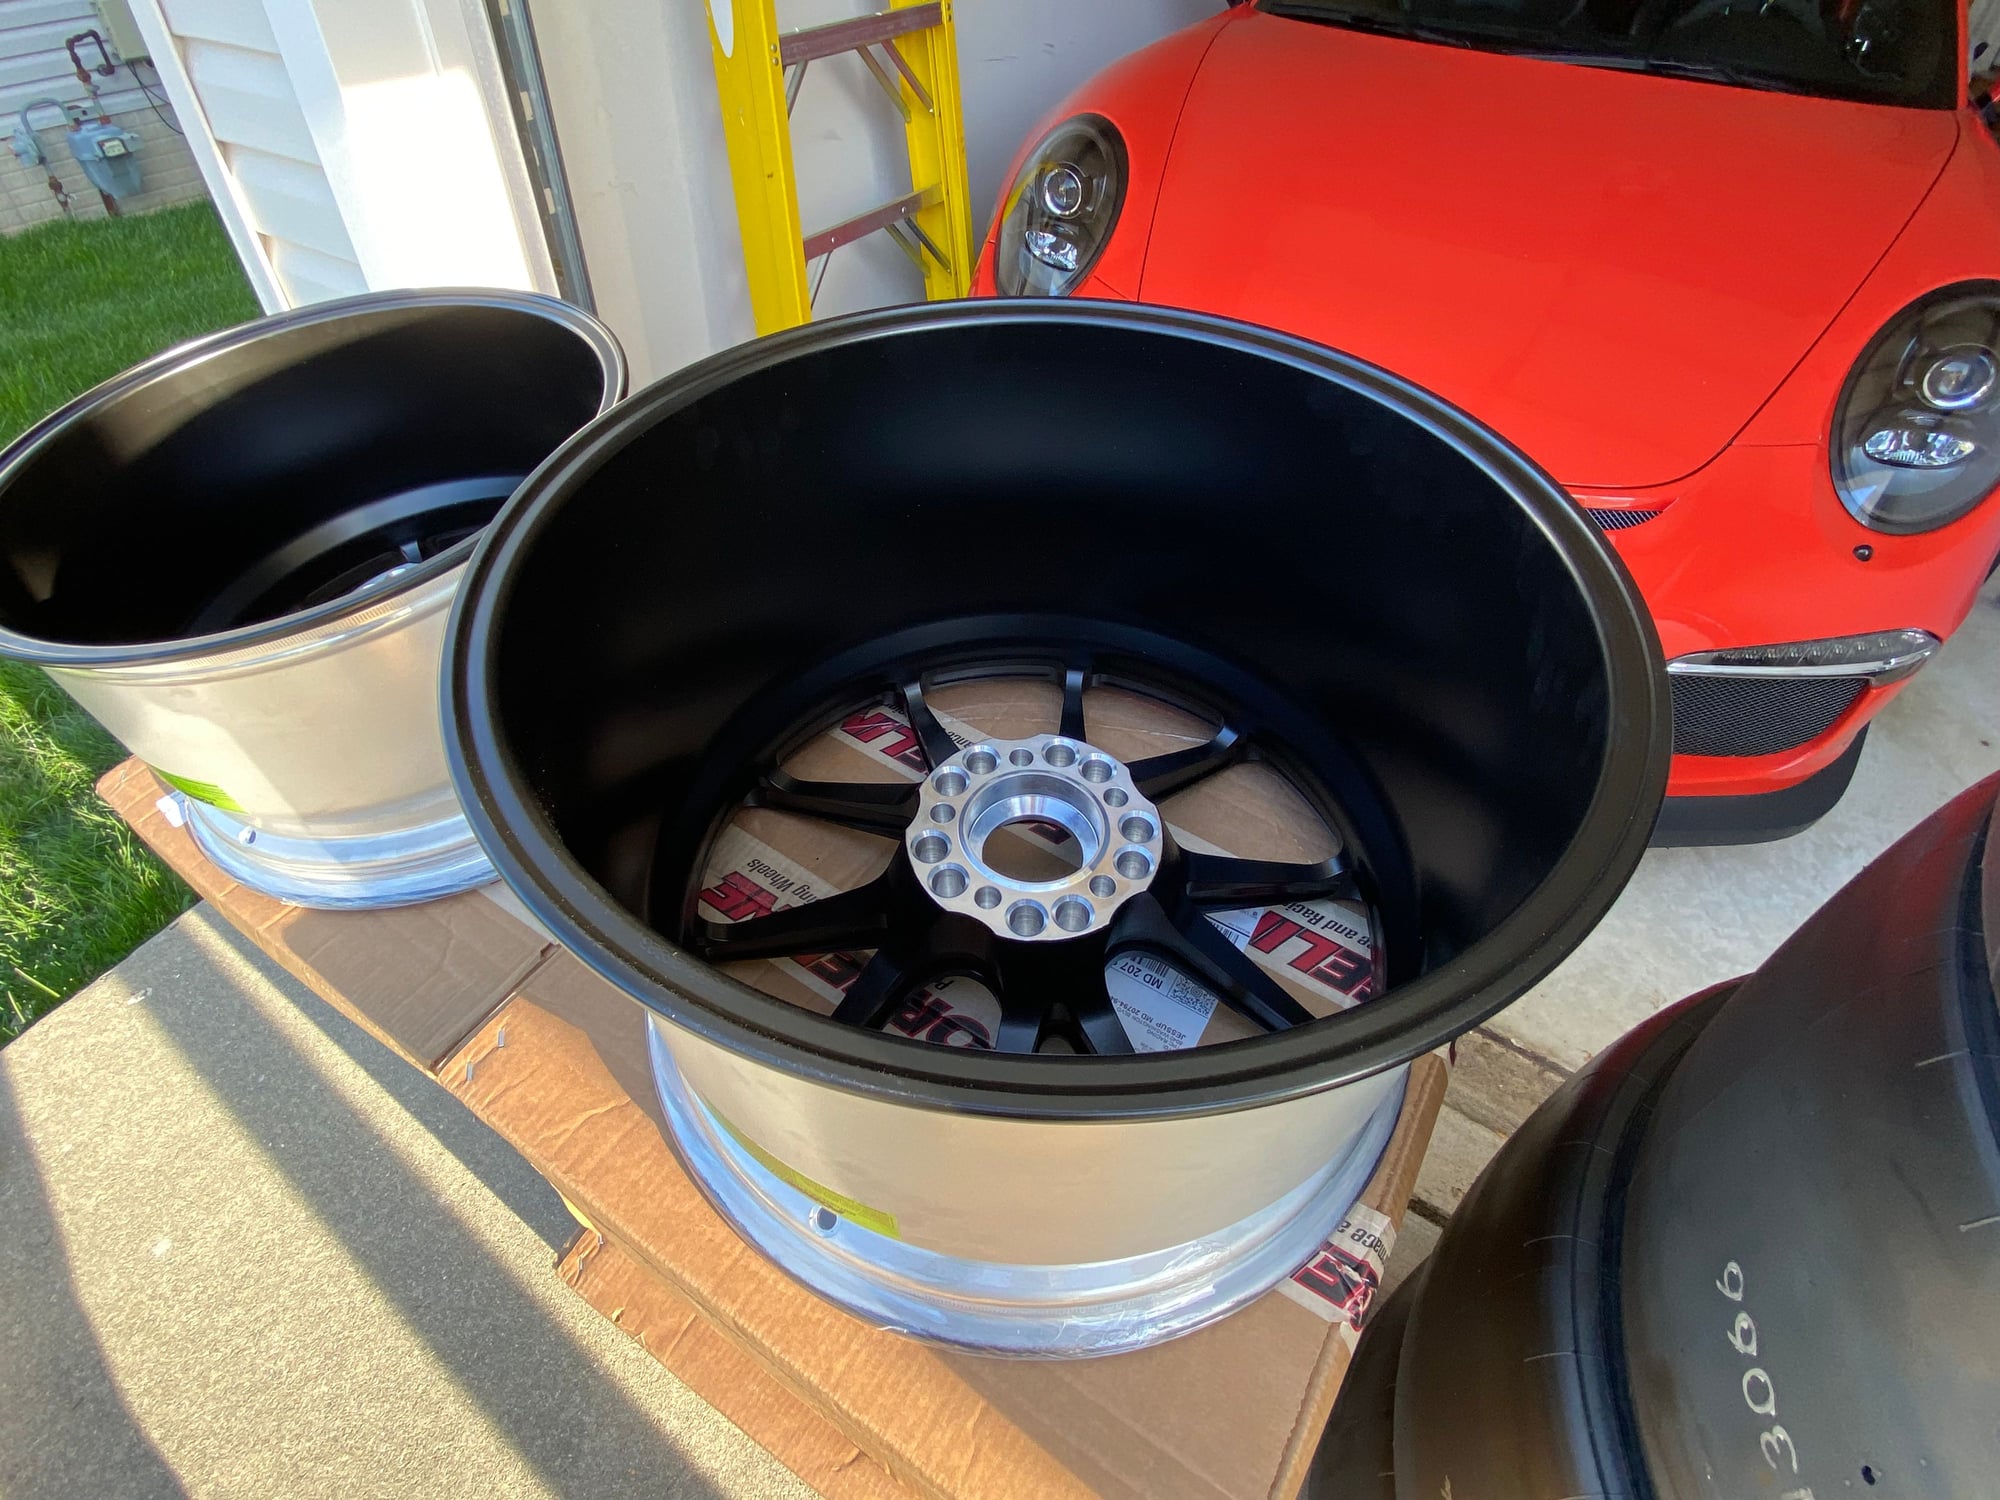 Wheels and Tires/Axles - 991 GT2RS/3RS - New set of Forgeline GS1-R Wheels & Slicks - New - Catonsville, MD 21228, United States